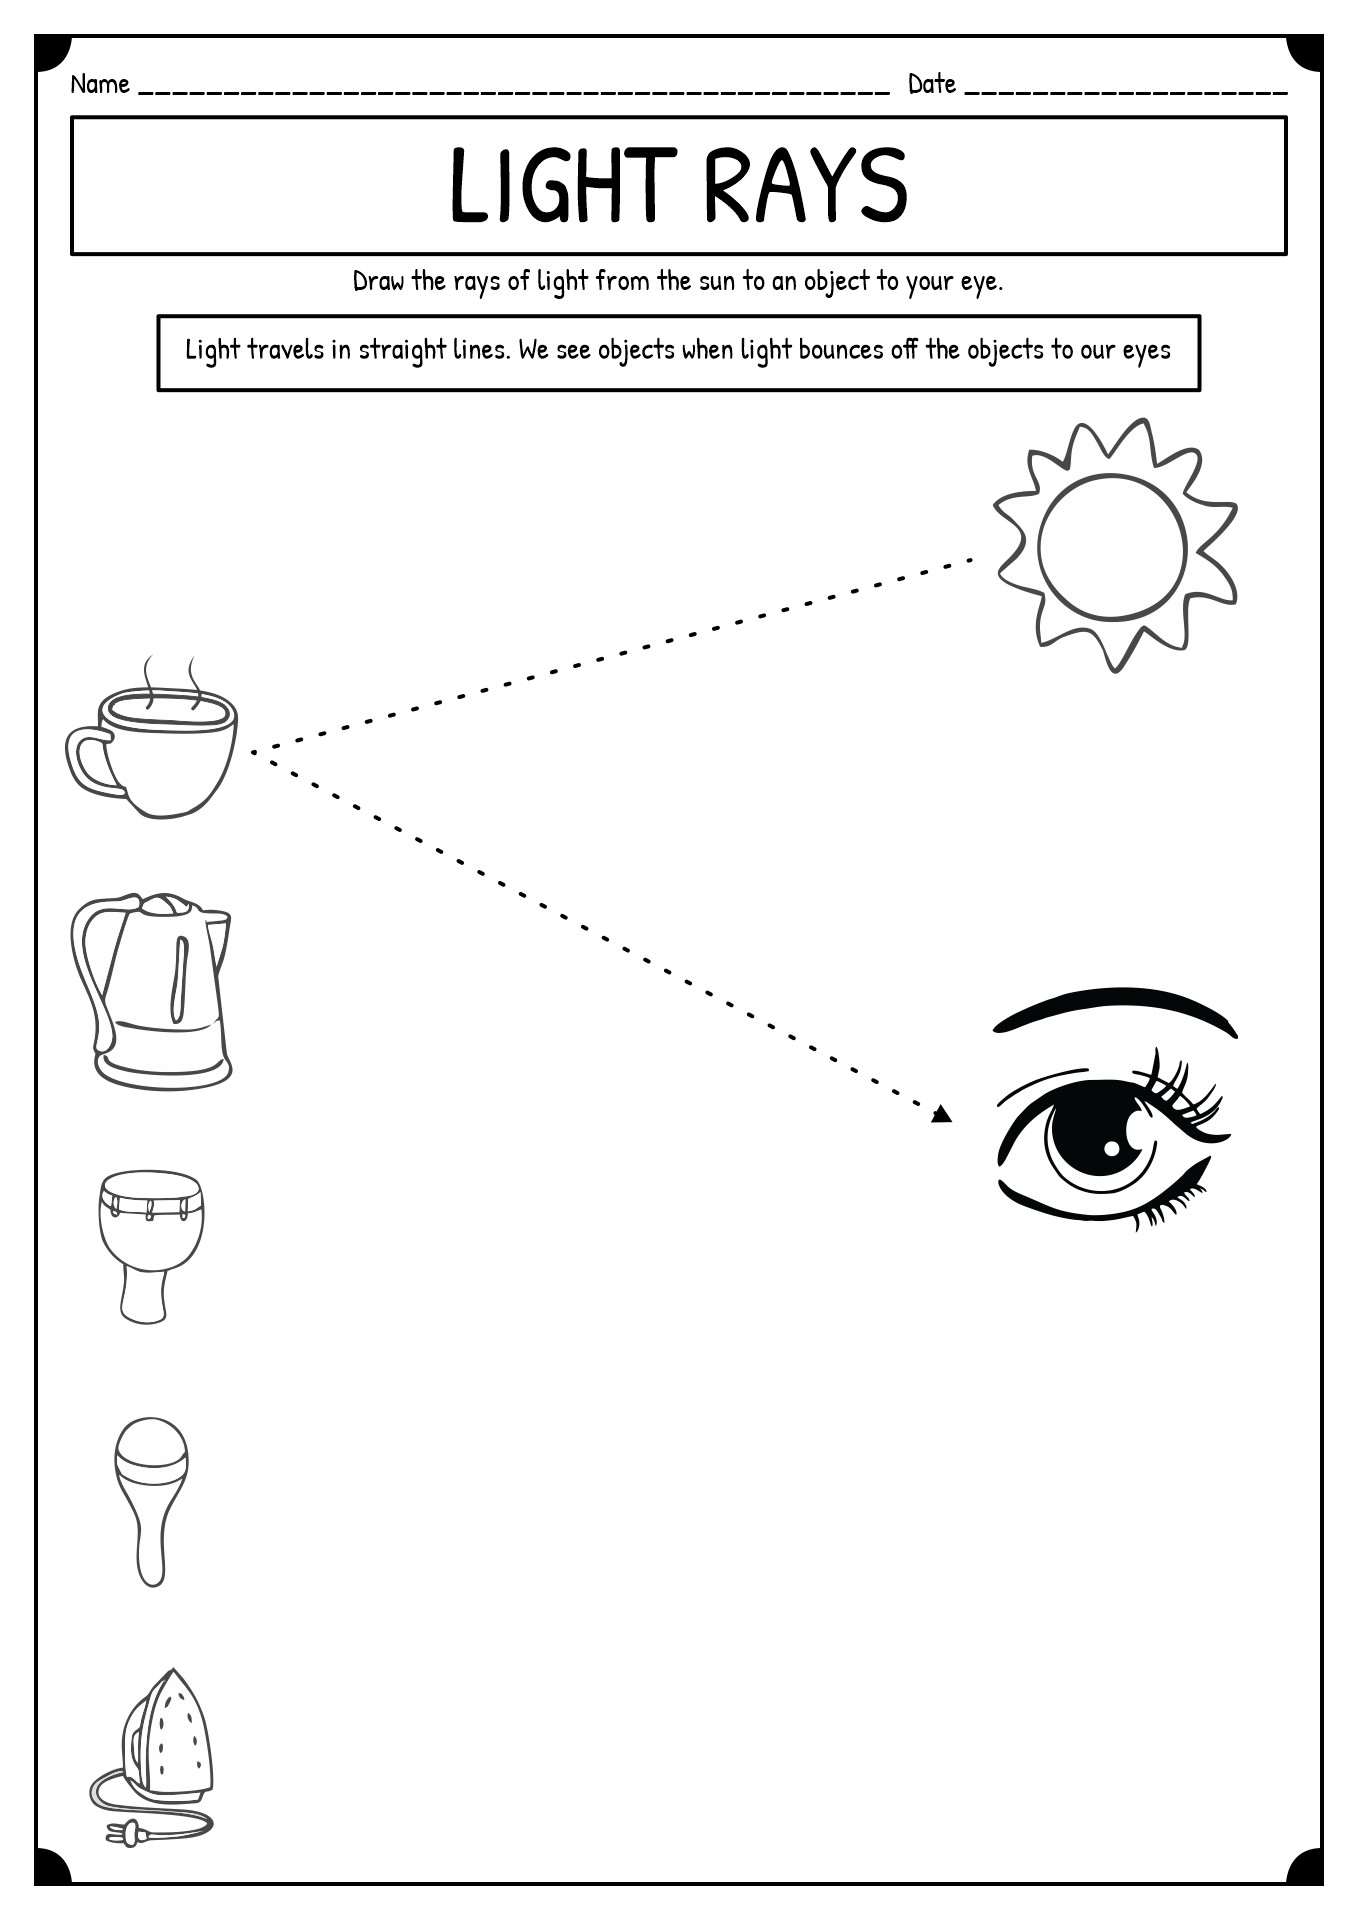 Sound and Light Worksheets Elementary Image